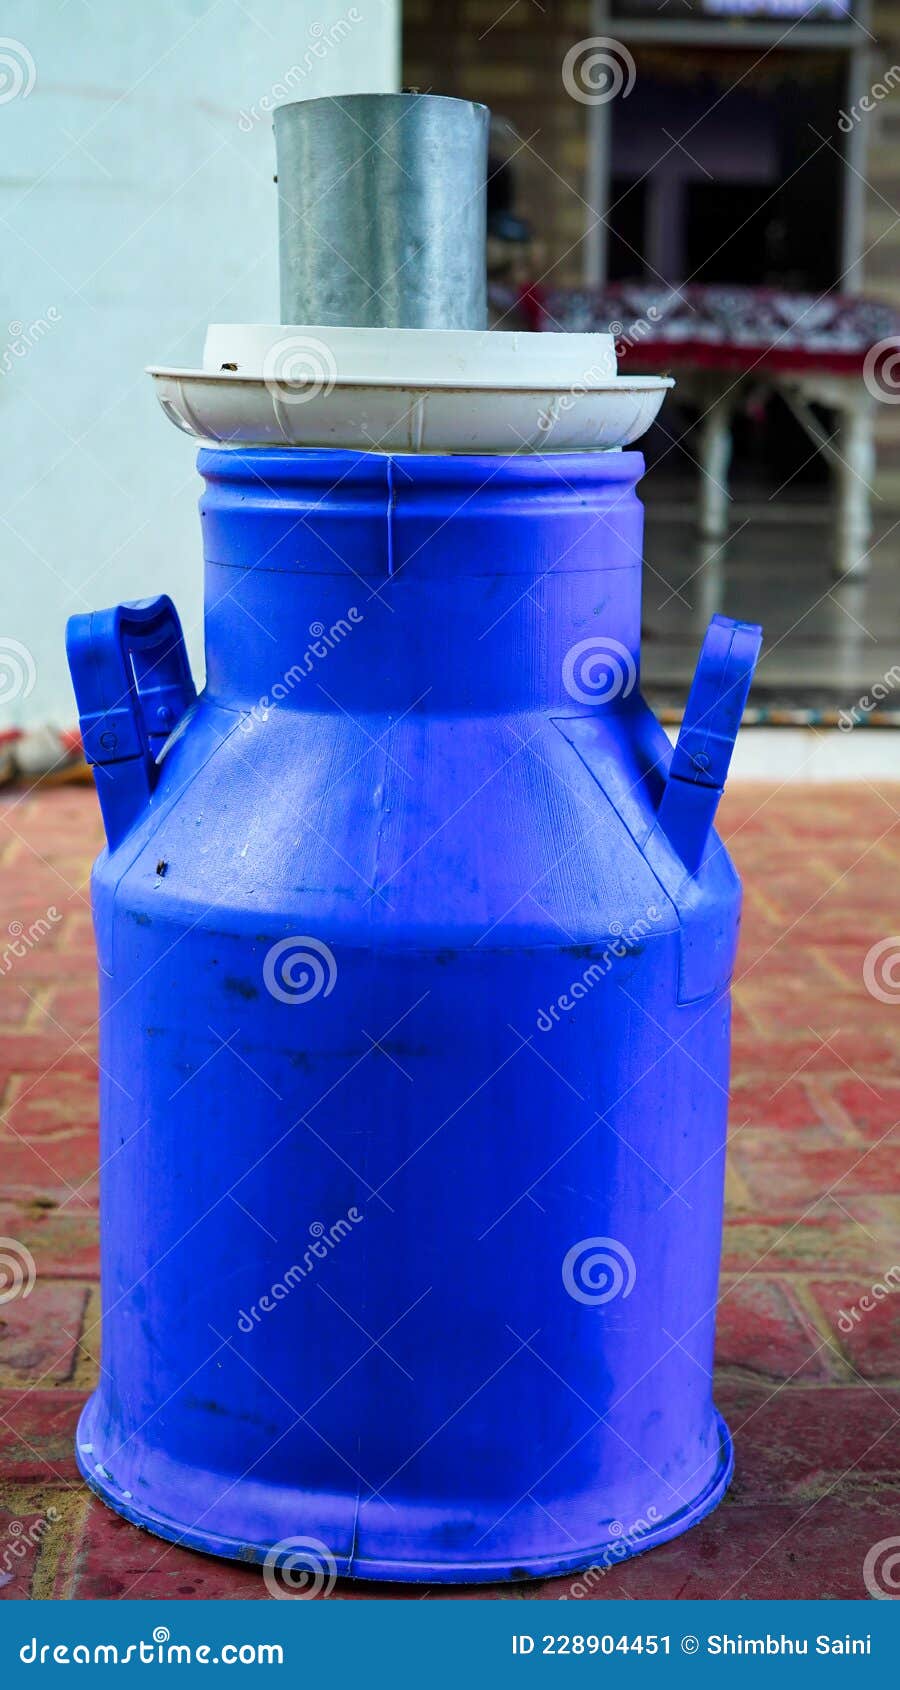 https://thumbs.dreamstime.com/z/close-up-shot-blue-plastic-milk-container-can-neatly-kept-village-india-rural-landscape-228904451.jpg